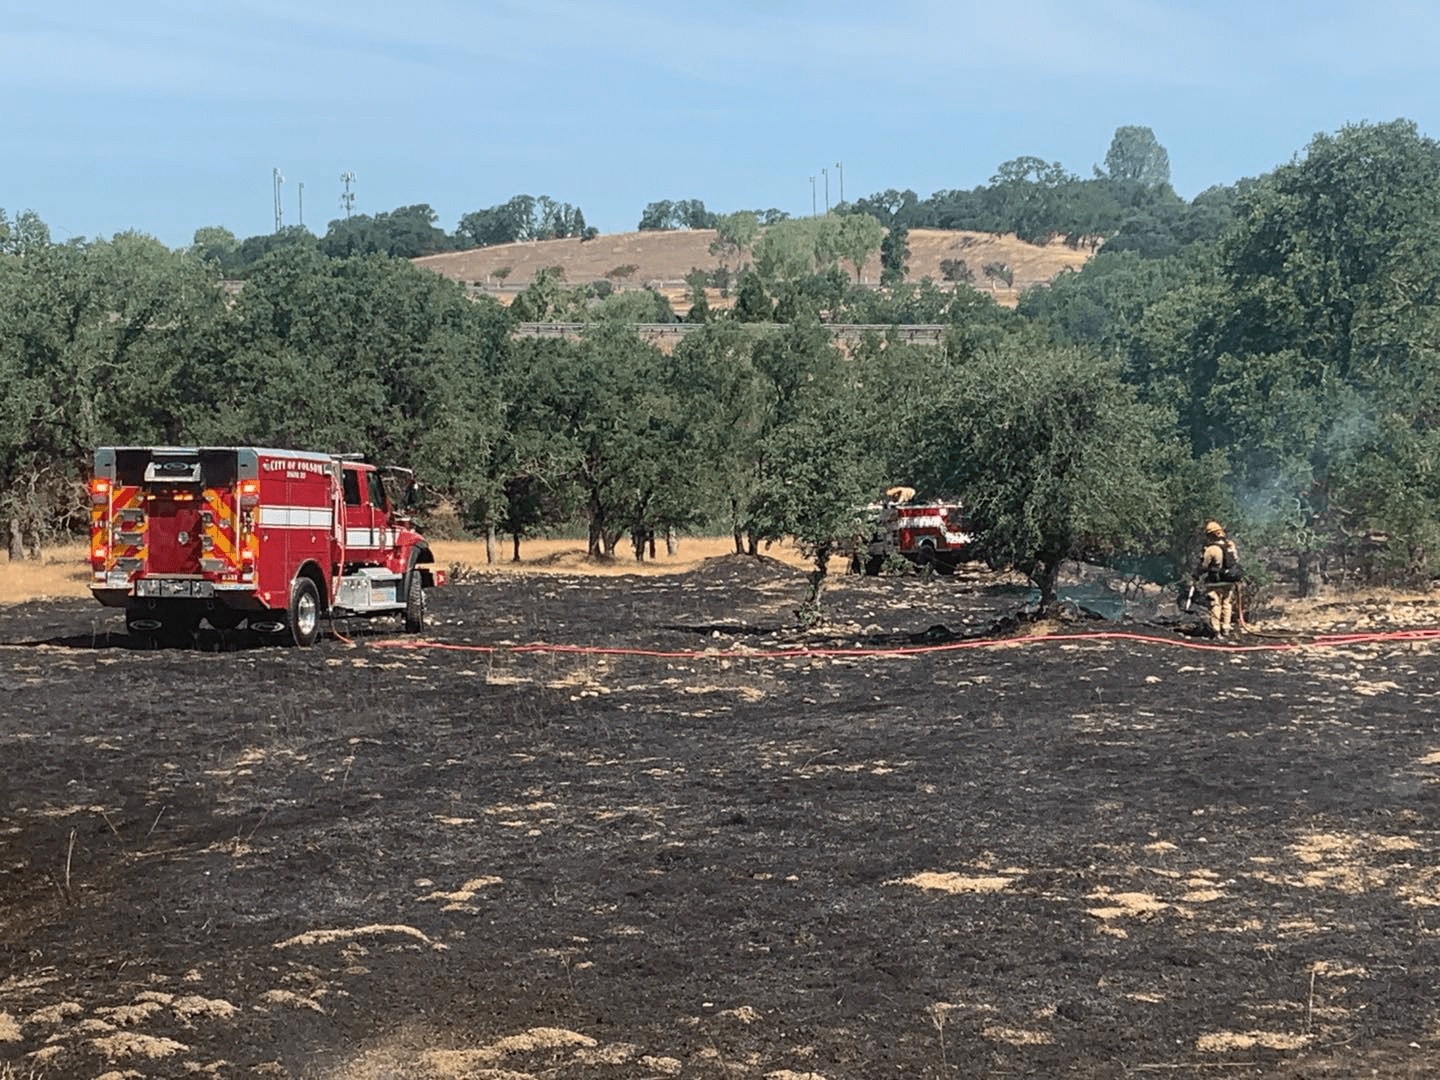 City of Folsom closes open spaces due to fire danger